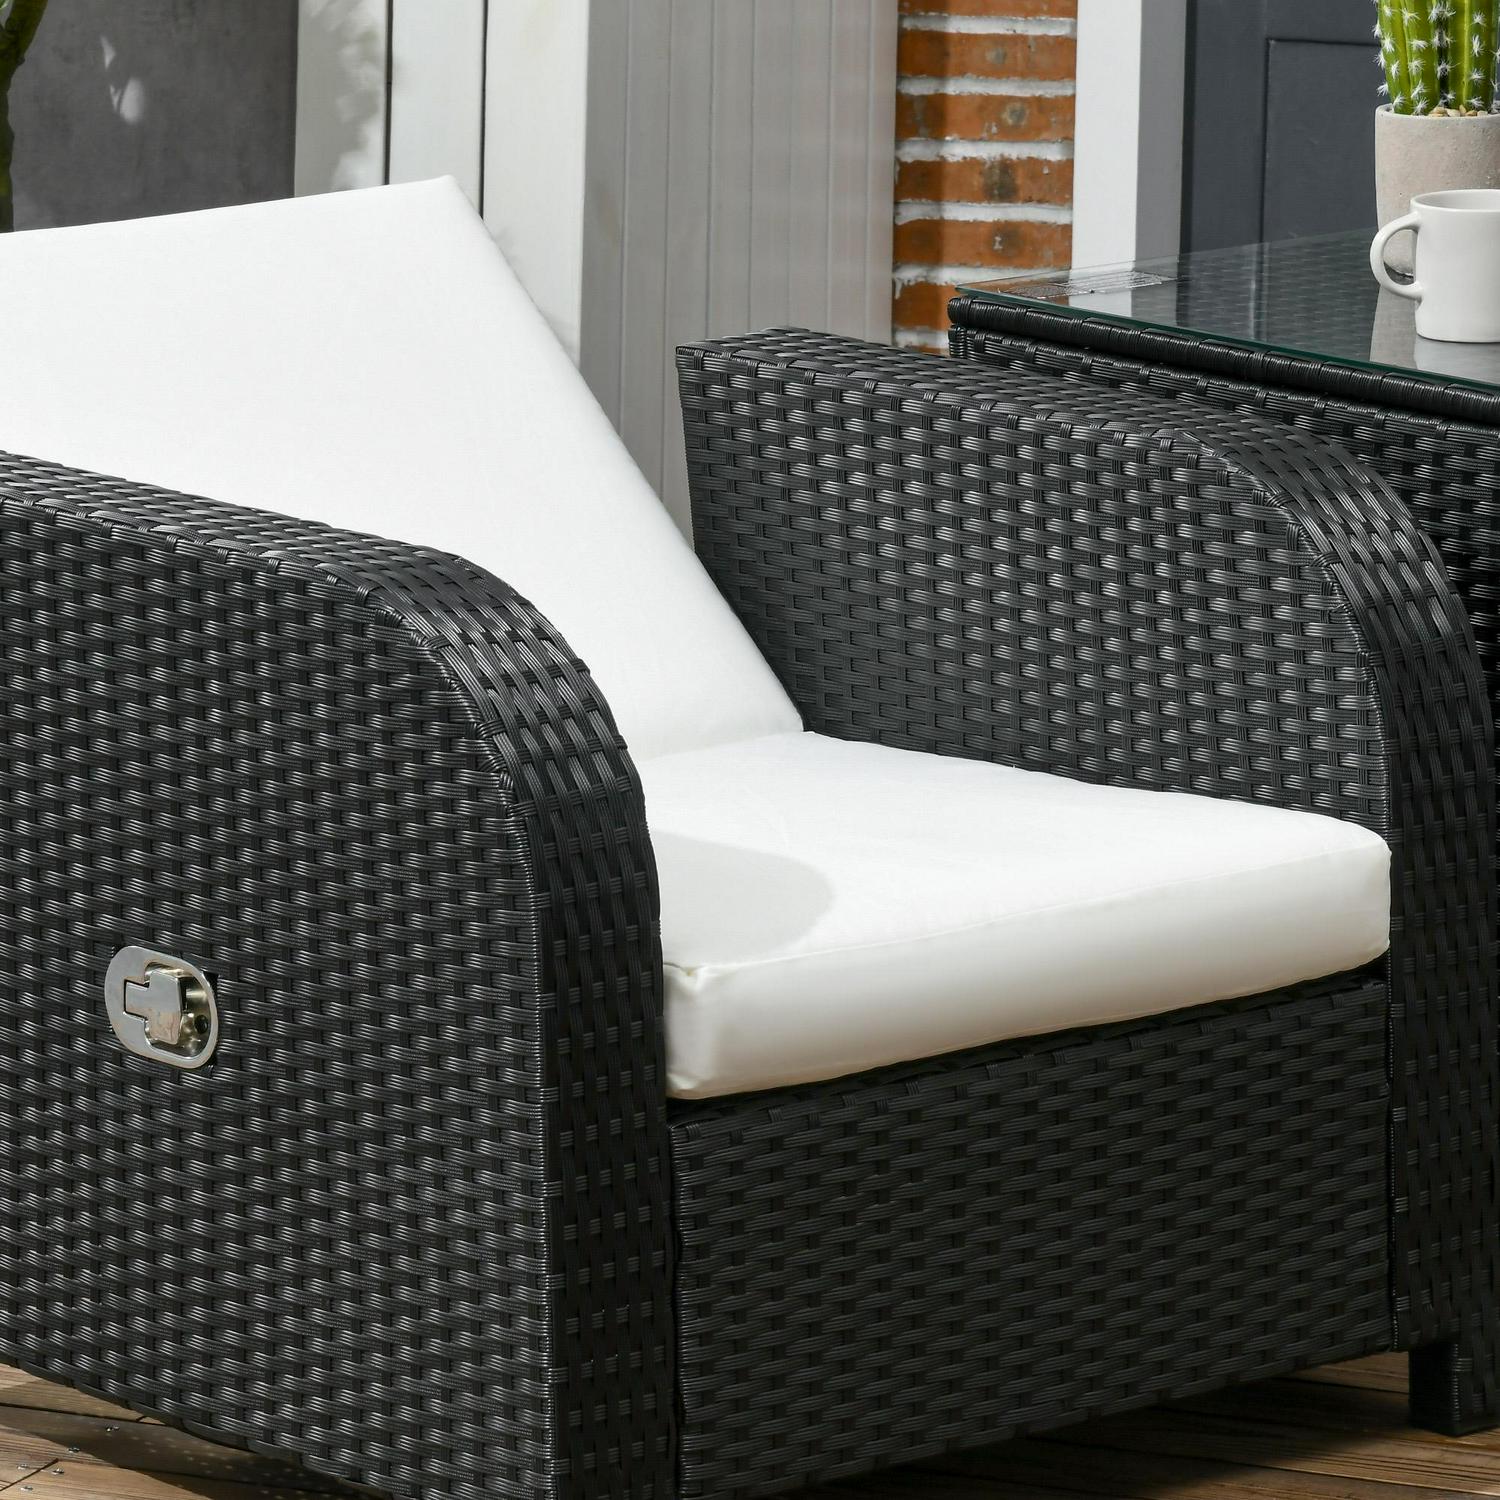 7 Seater Outdoor Rattan Garden Furniture Sets With Wicker Sofa, Reclining Armchair And Glass Table, Black